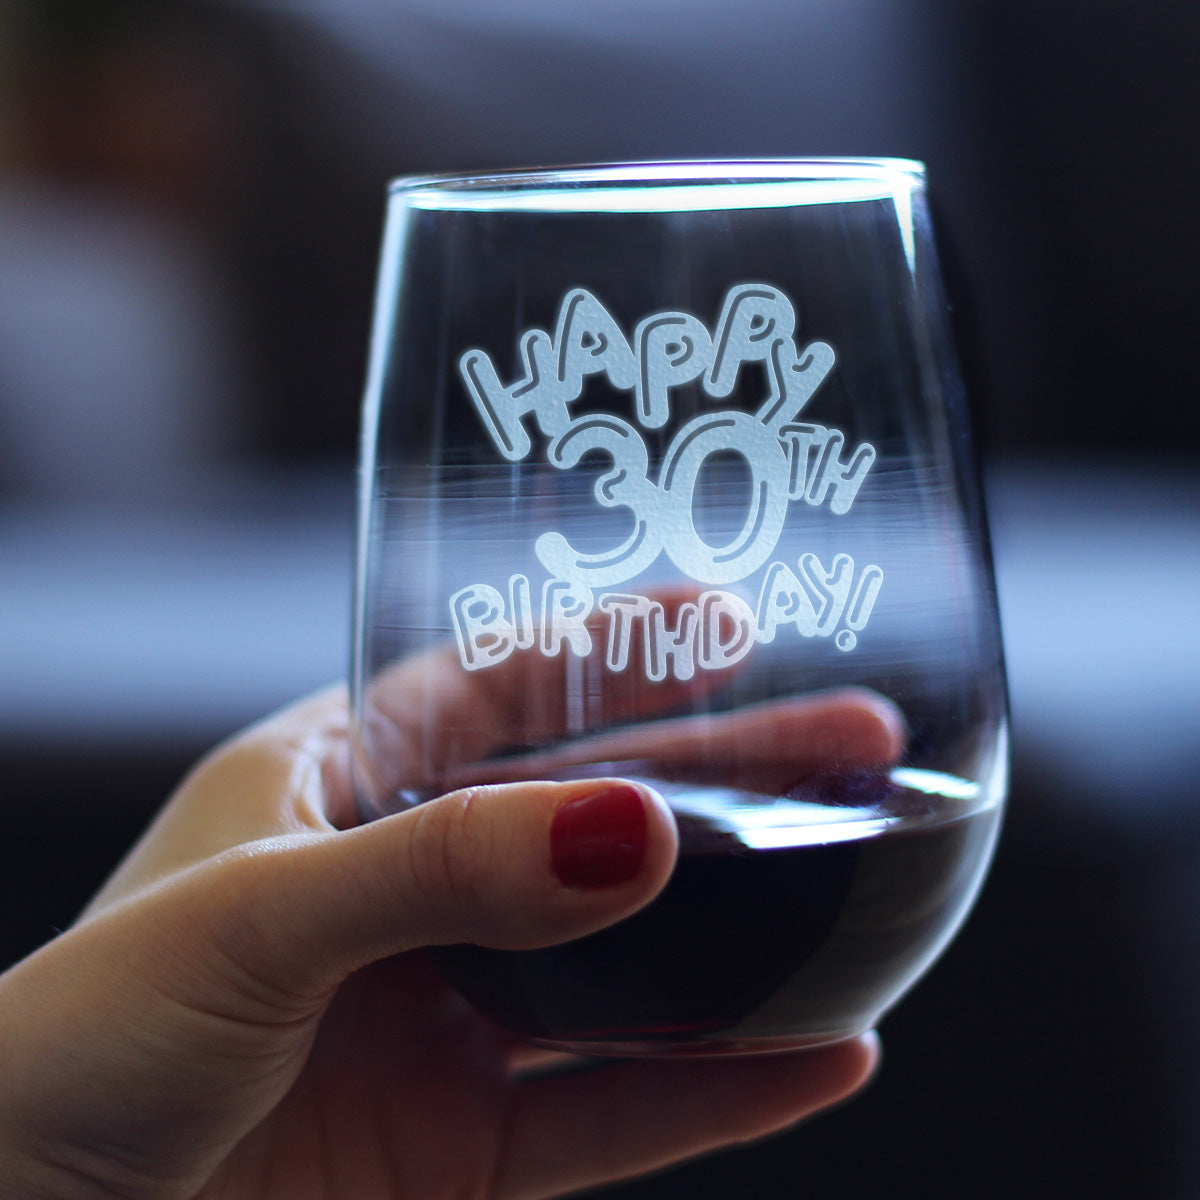 Happy 30th Birthday Balloons - Stemless Wine Glass Gifts for Women &amp; Men Turning 30 - Bday Party Decor - Large Glasses 17 Oz